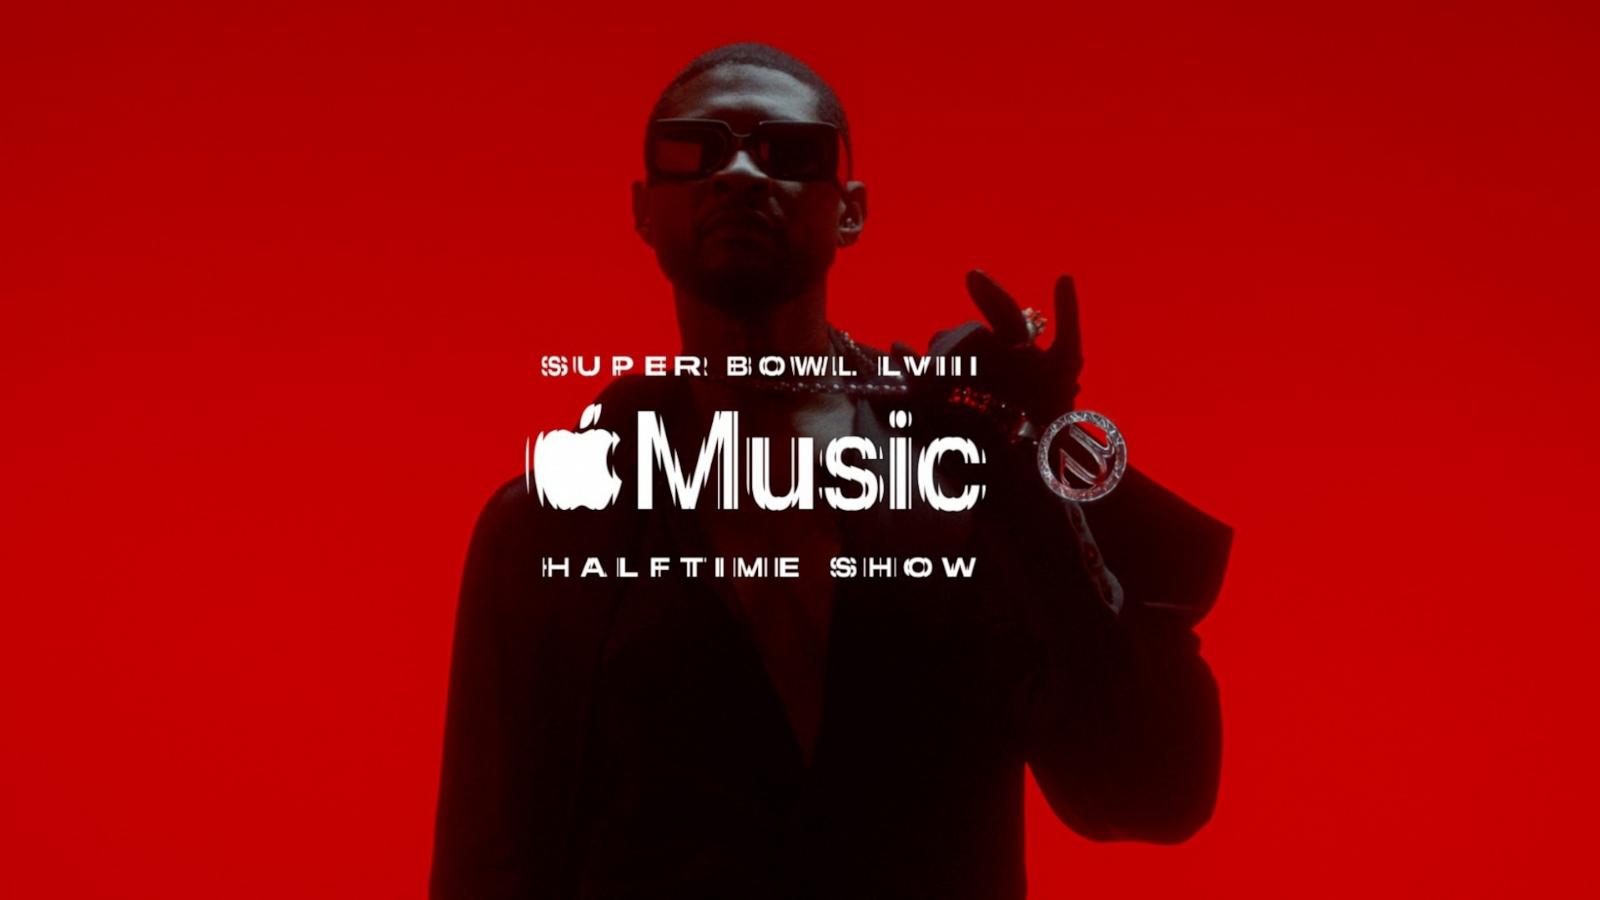 PHOTO: Usher appears in the new trailer for the Apple Music Super Bowl LVIII Halftime Show.